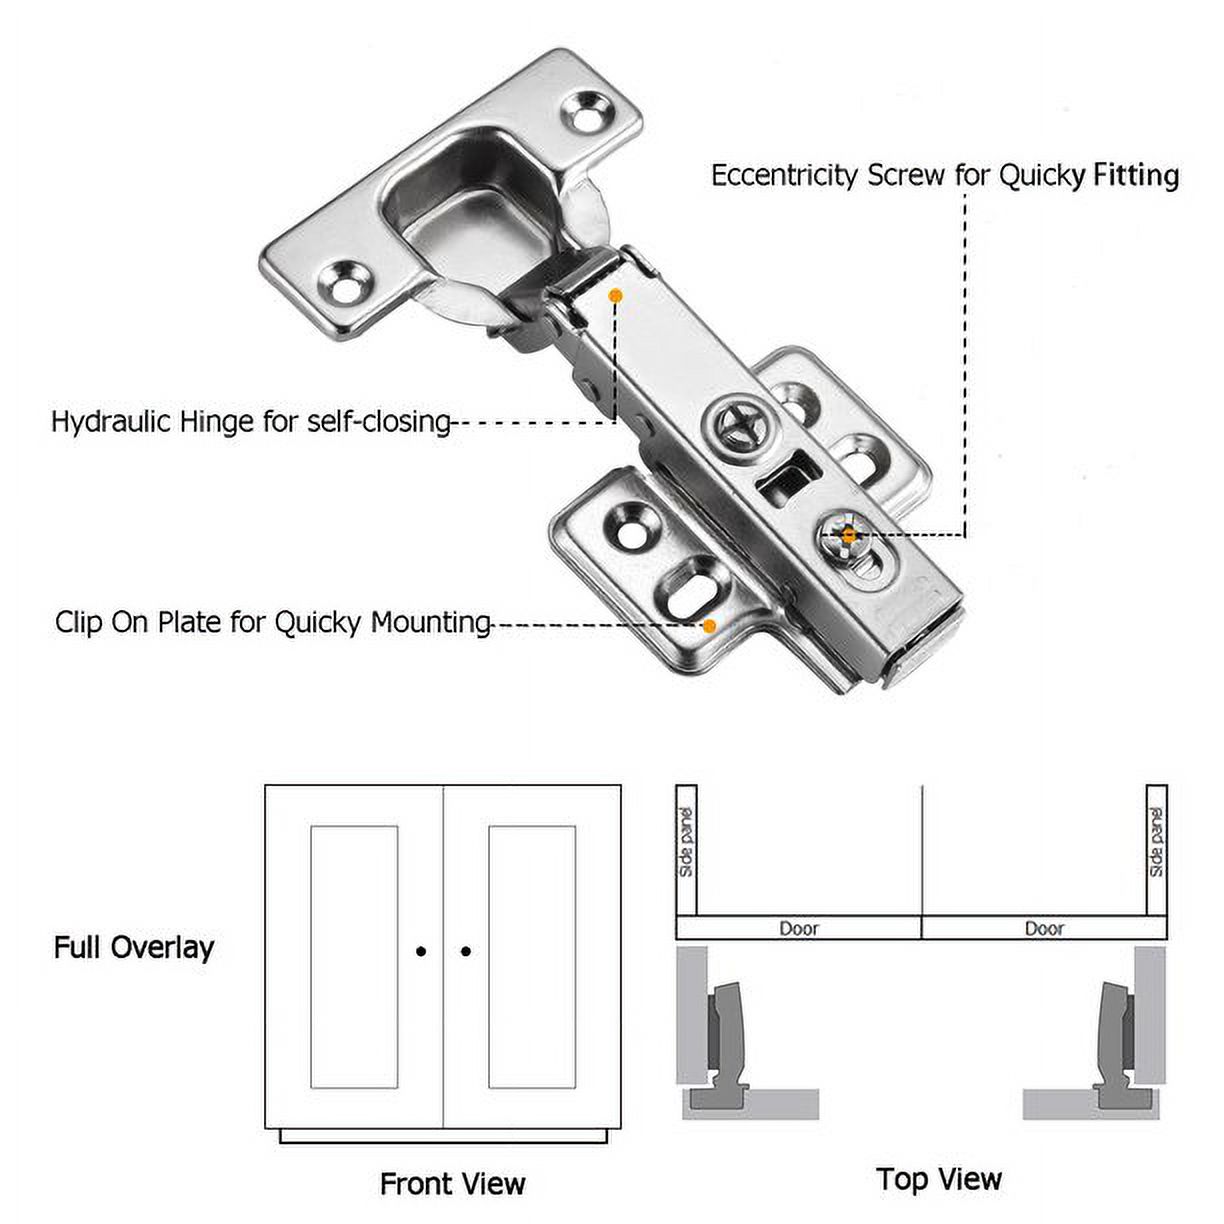 Luokim 10pcs Standard Cabinet Hinge,Fit for Frameless Cabinet,European Full Overlay,Soft Closing,Four-Hole mounting Plate Hinges,Nickel Plated Finish - image 5 of 7